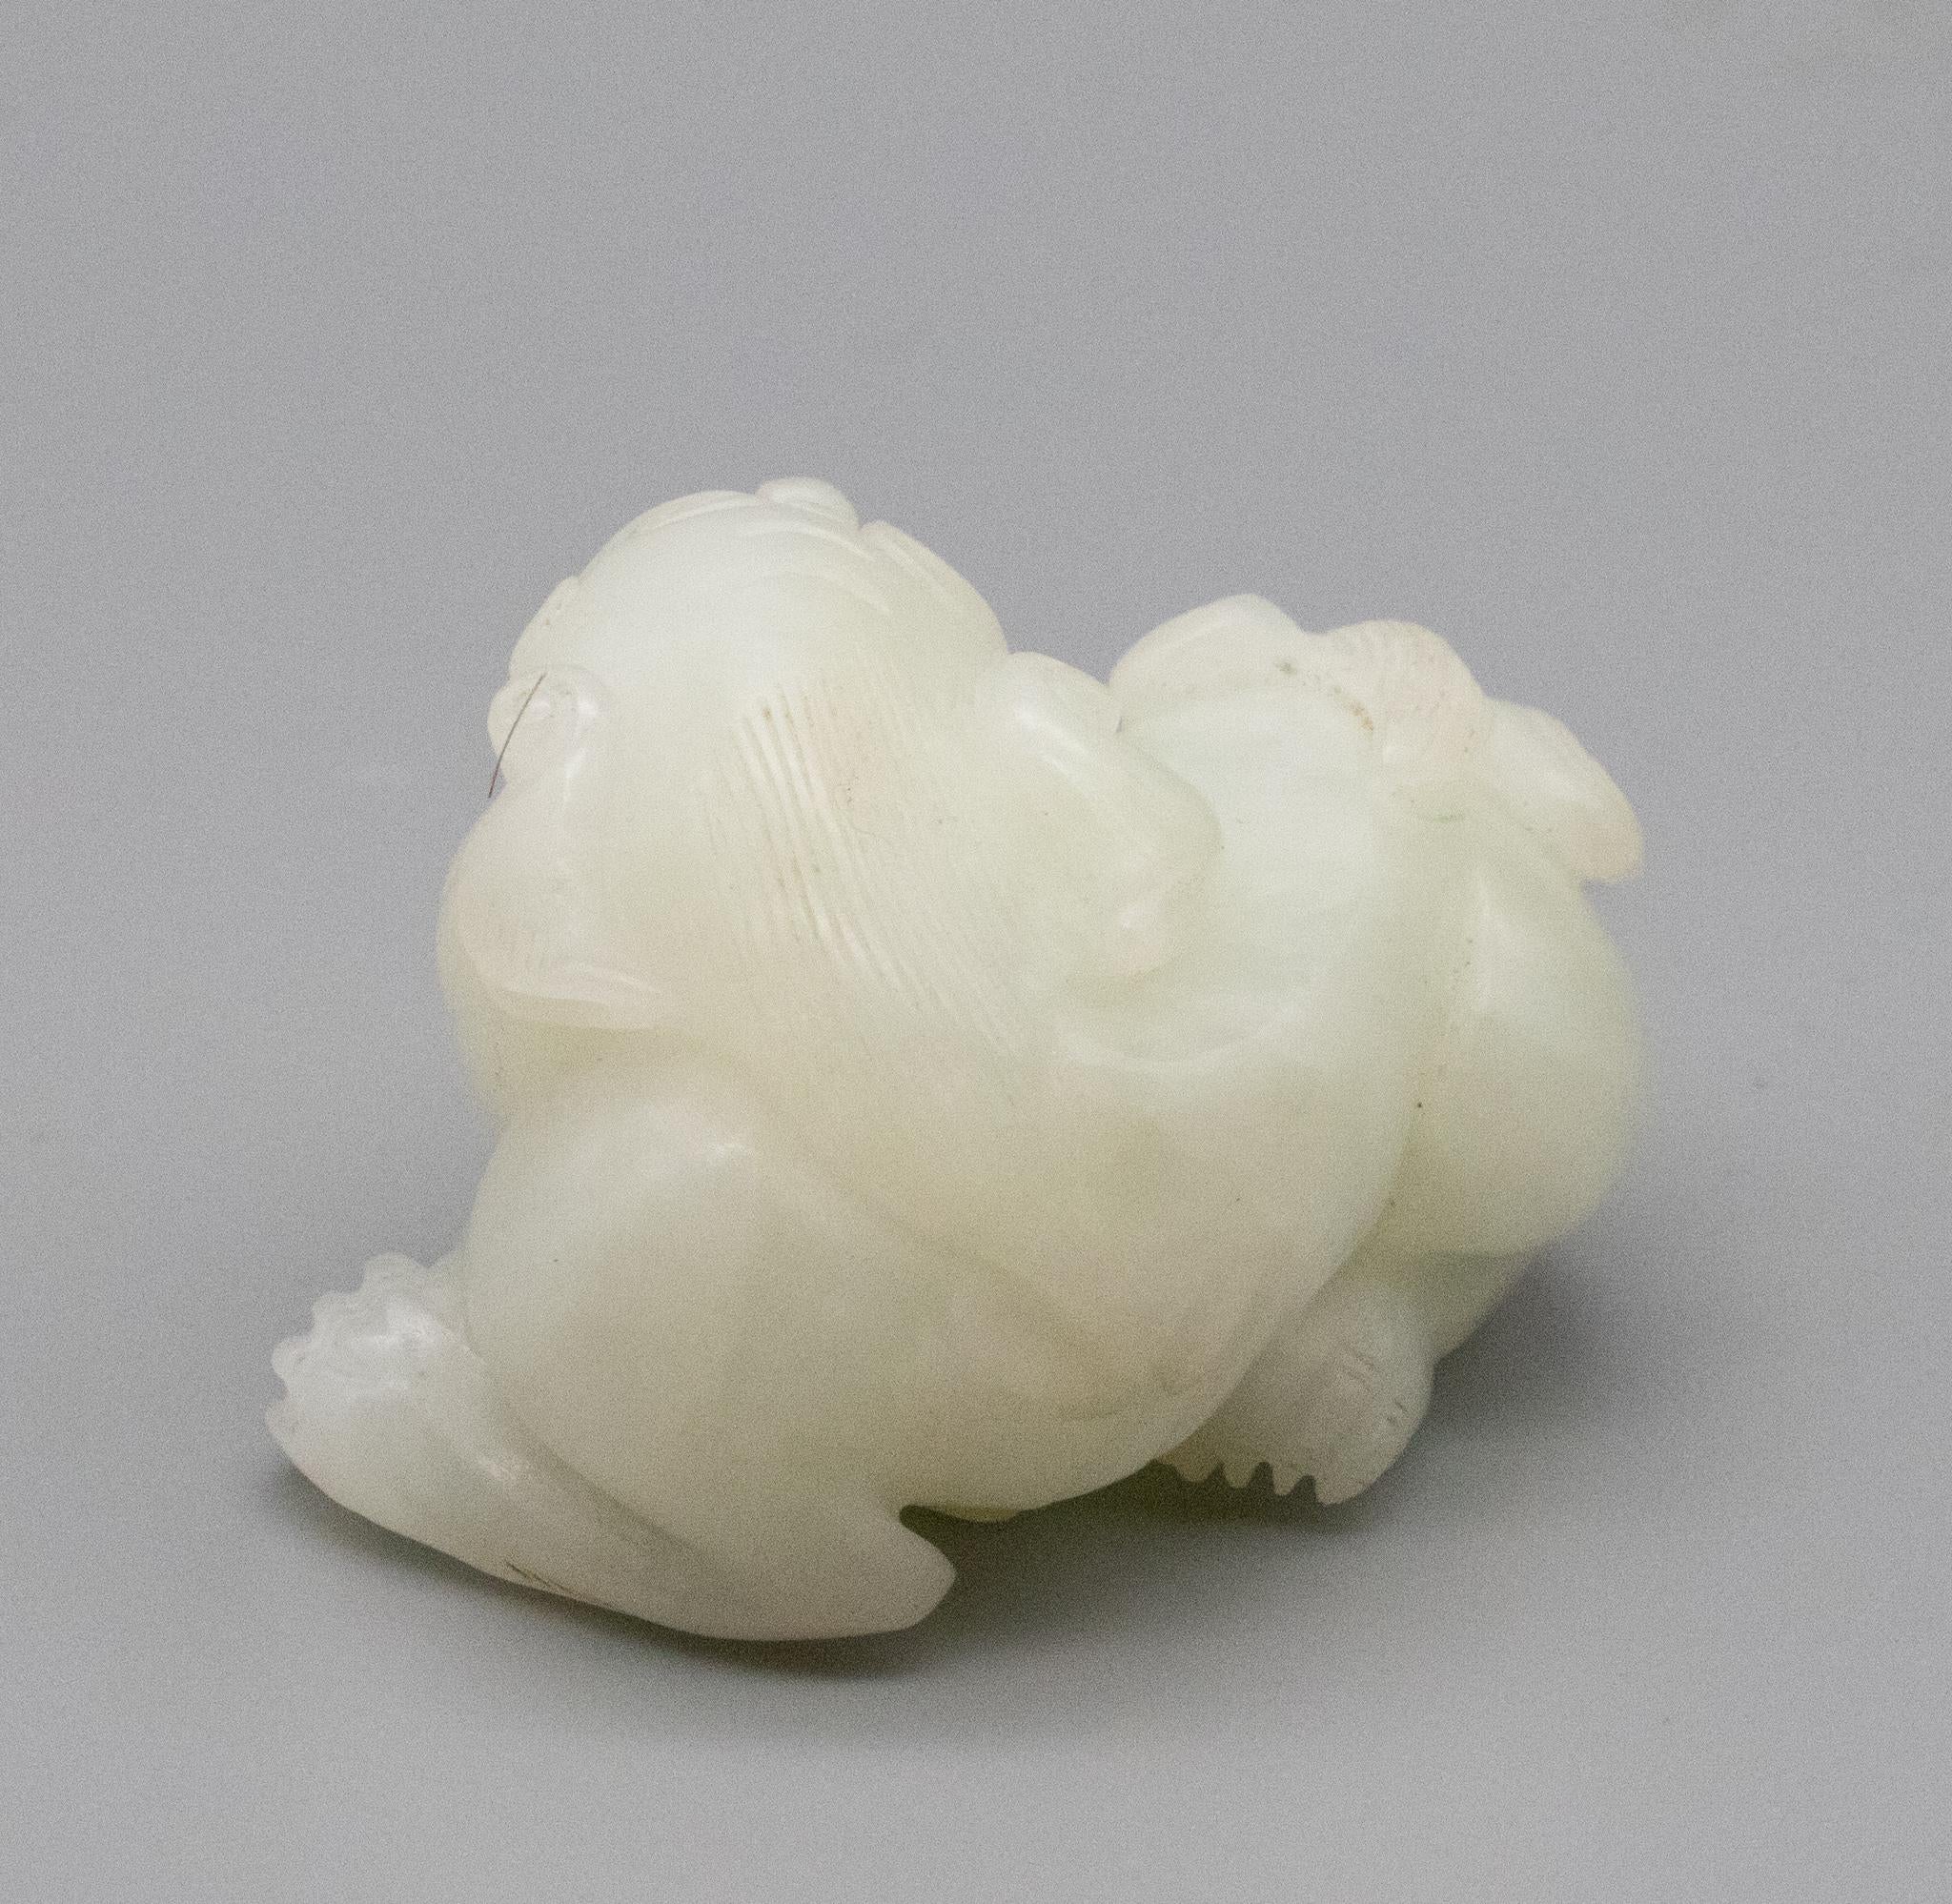 China Qing Dynasty 18th Century Reclining Foo Dog Carved in White Nephrite Jade 3